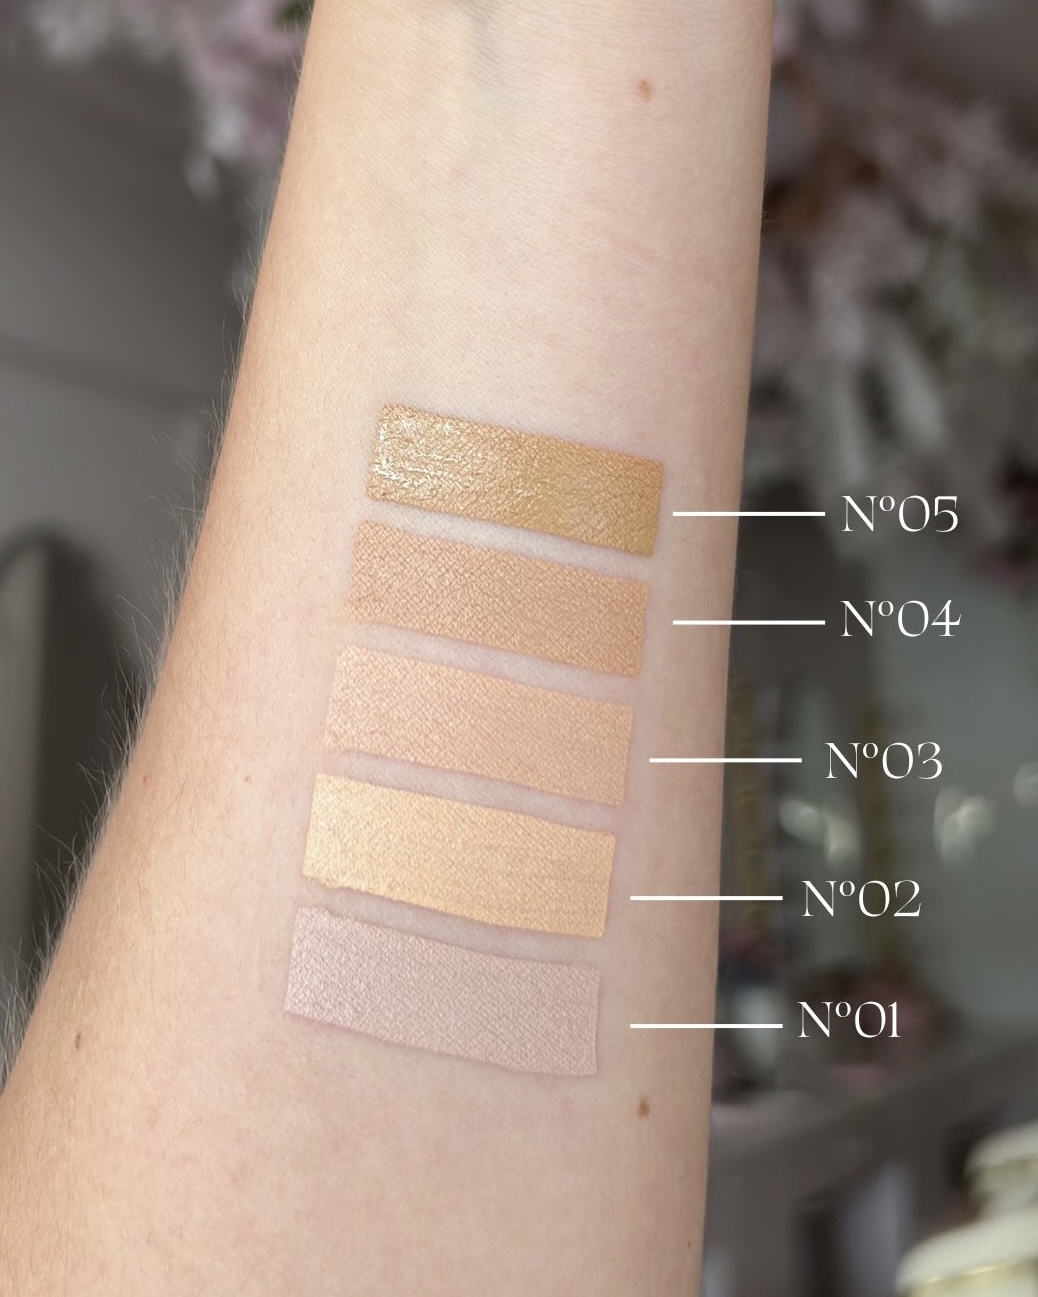 Concealer arm swatches